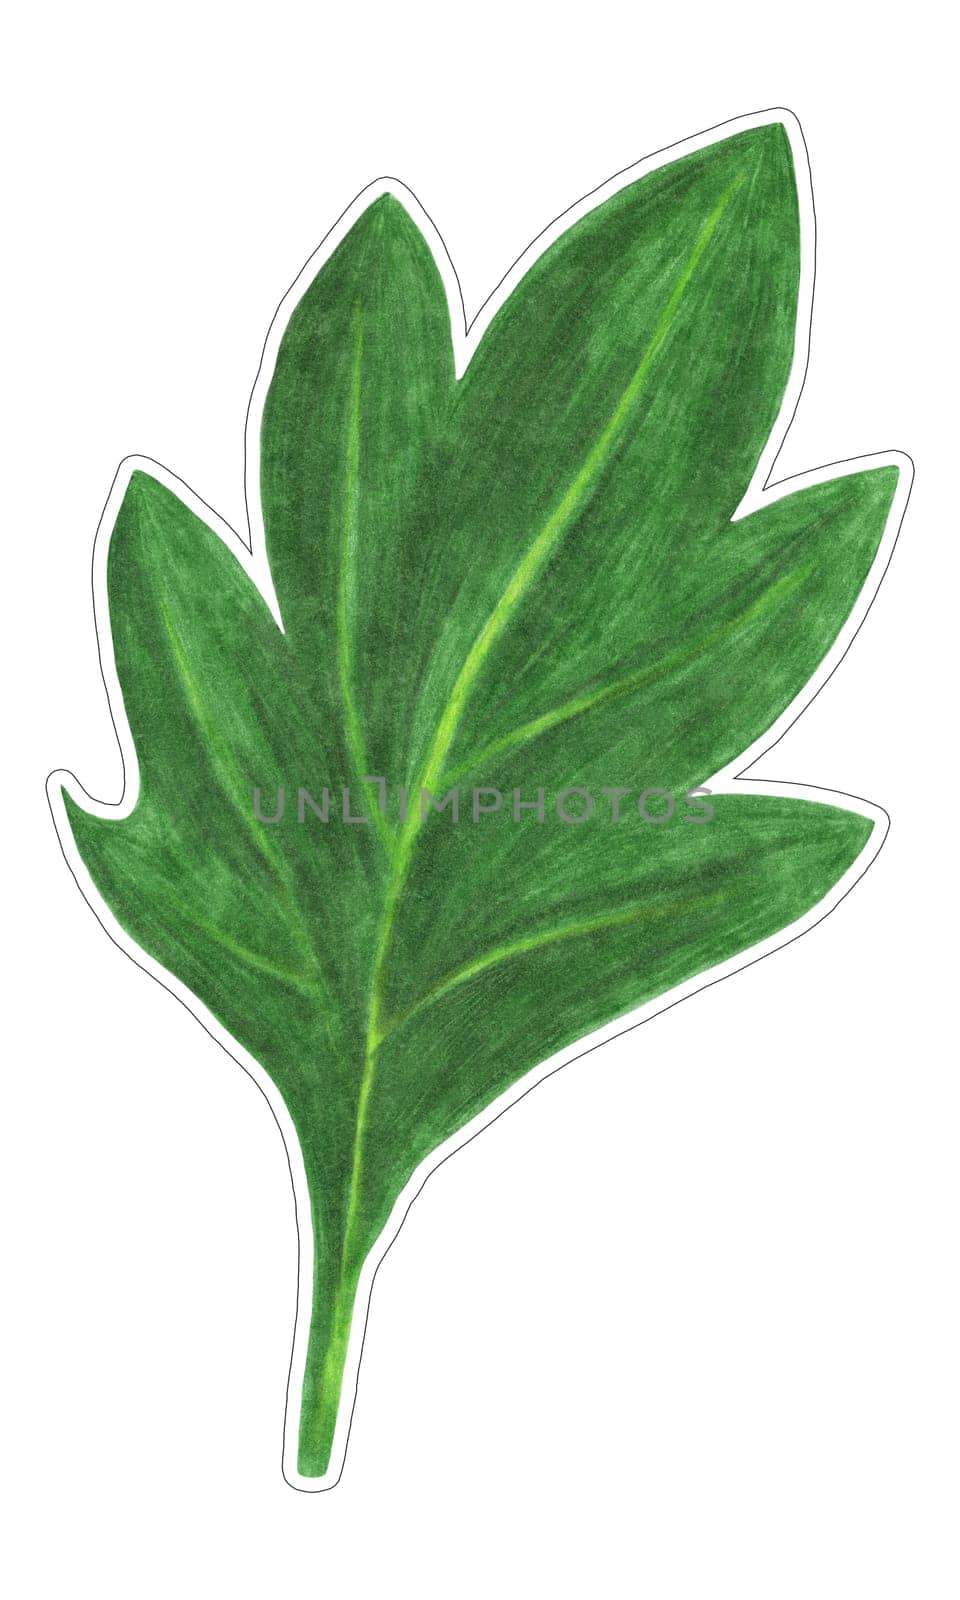 Green Leaf of Chrysanthemum Sticker Isolated on White Background. Flower Leaf Element Sticker Drawn by Color Pencil.